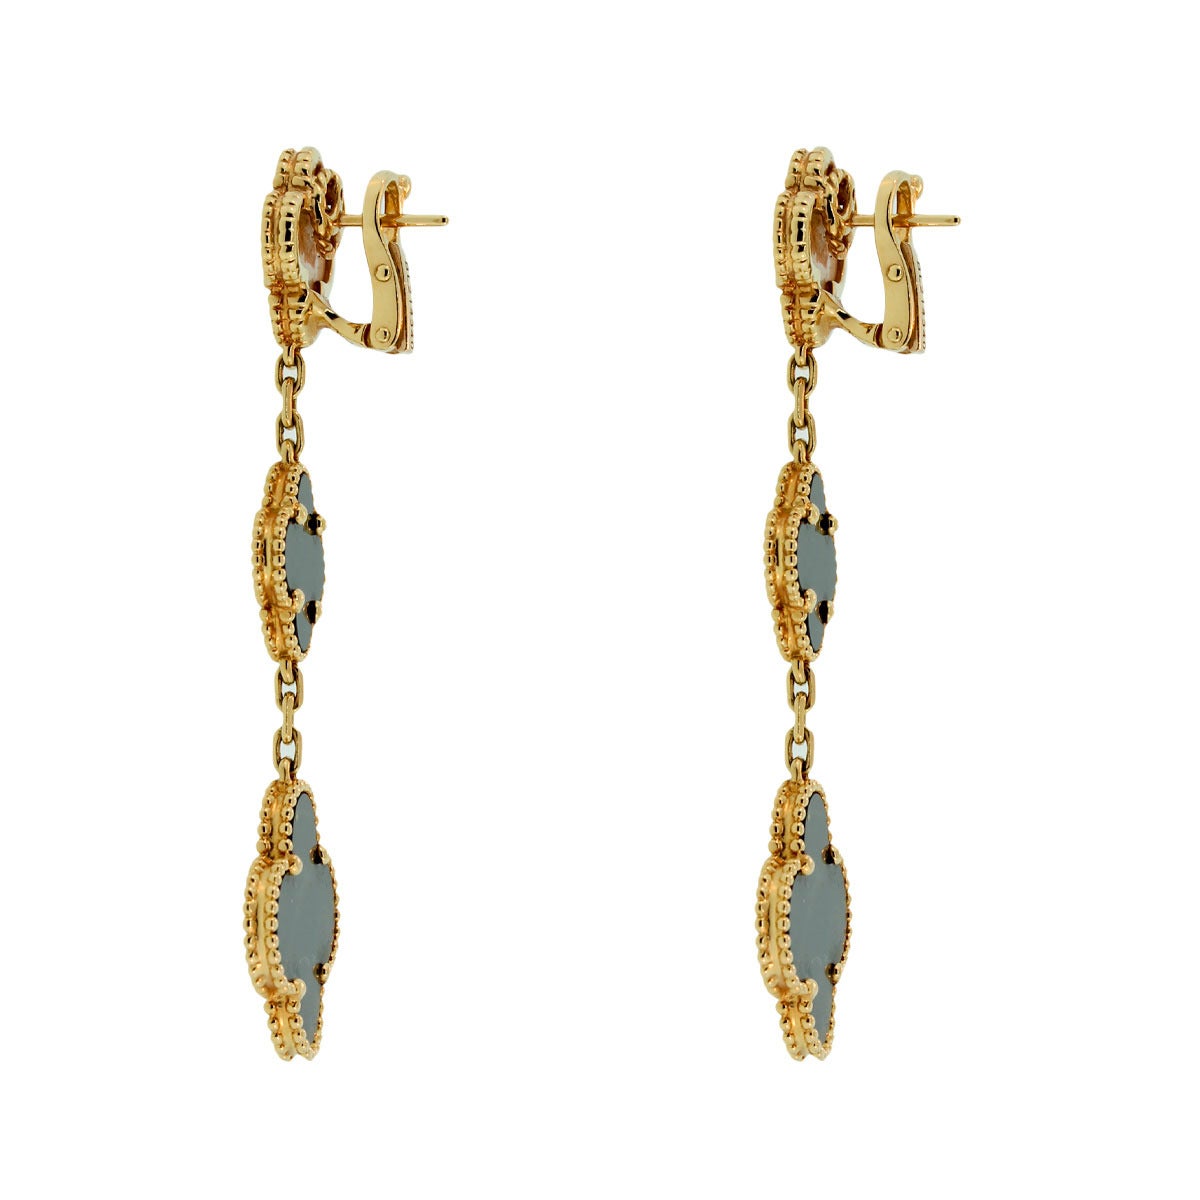 Designer: Van Cleef & Arpels
Style: Magic Alhambra 3 Motifs Earclips
Material: 18k Yellow Gold
Gemstone Details: Onyx, White Mother of Pearl, Dark Mother of Pearl
Earrings Size: 2.62